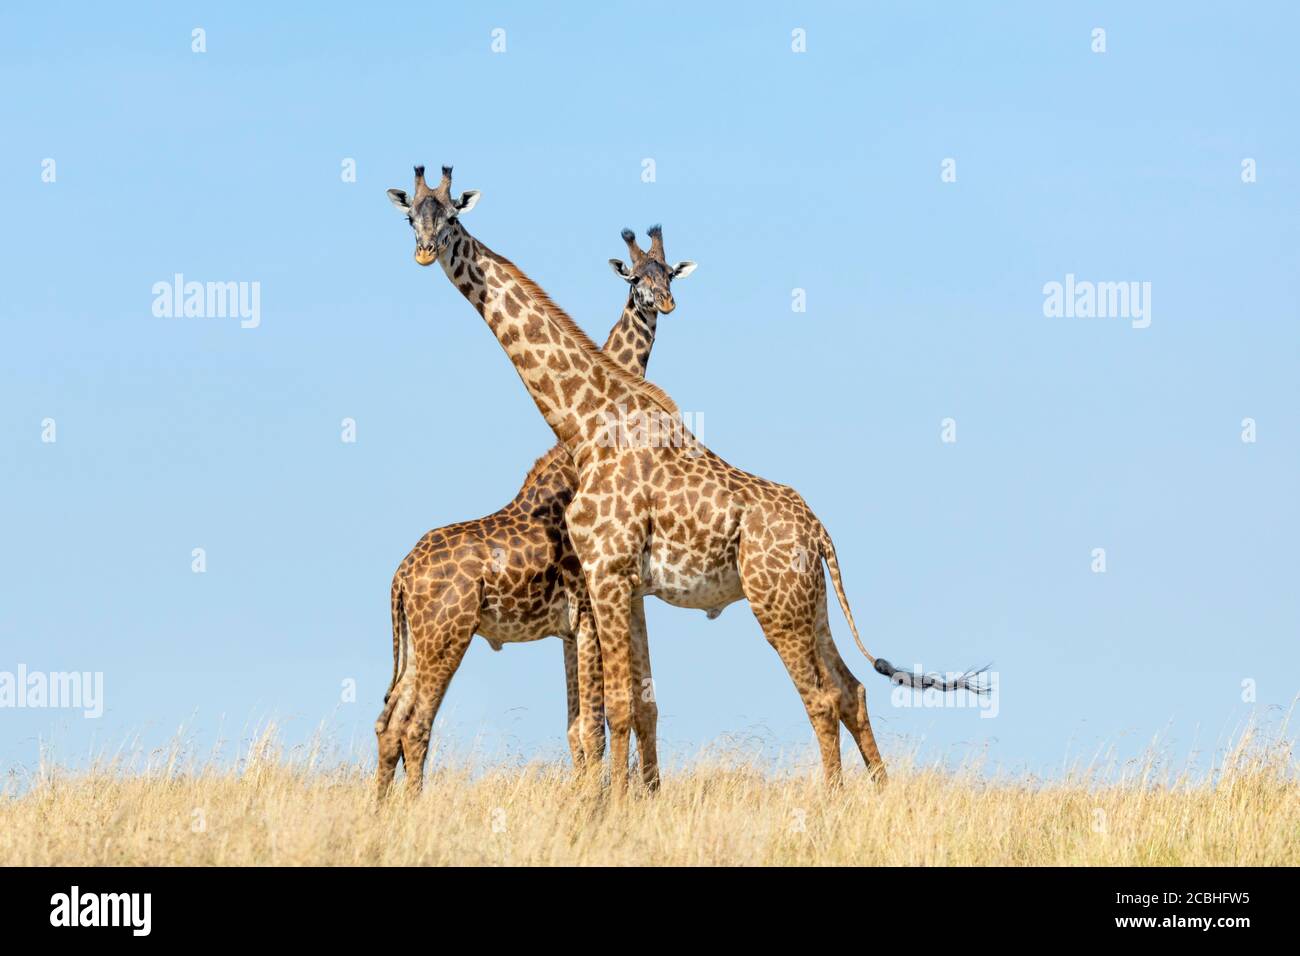 Two adult male giraffe standing next to each other with neck crossed on a sunny day with blue sky in background in Masai Mara Kenya Stock Photo